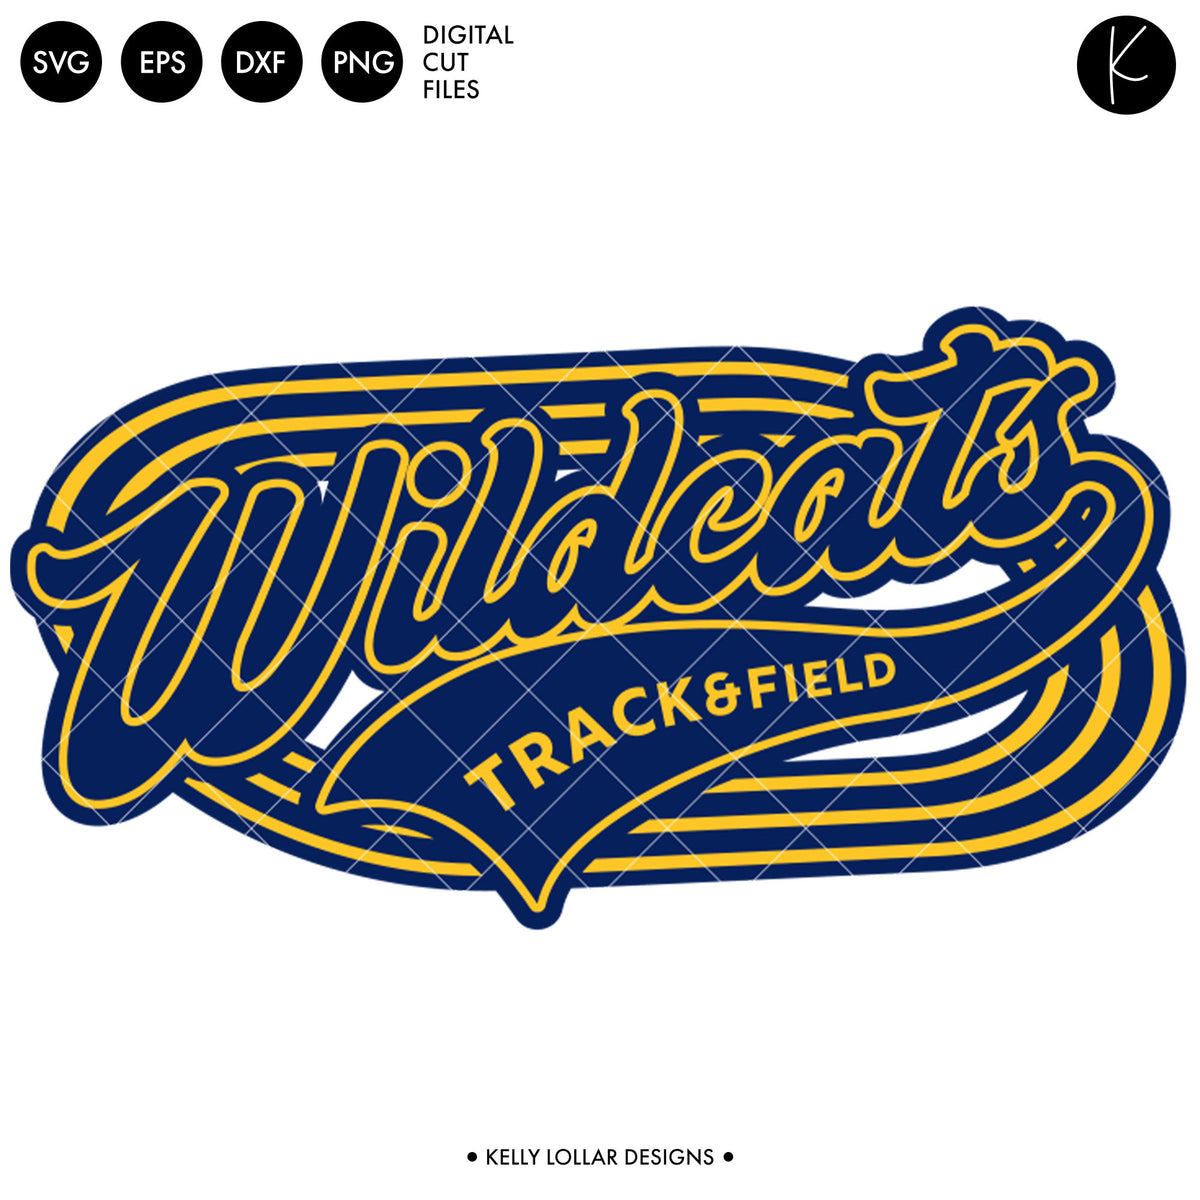 Wildcats Track &amp; Field Bundle | SVG DXF EPS PNG Cut Files